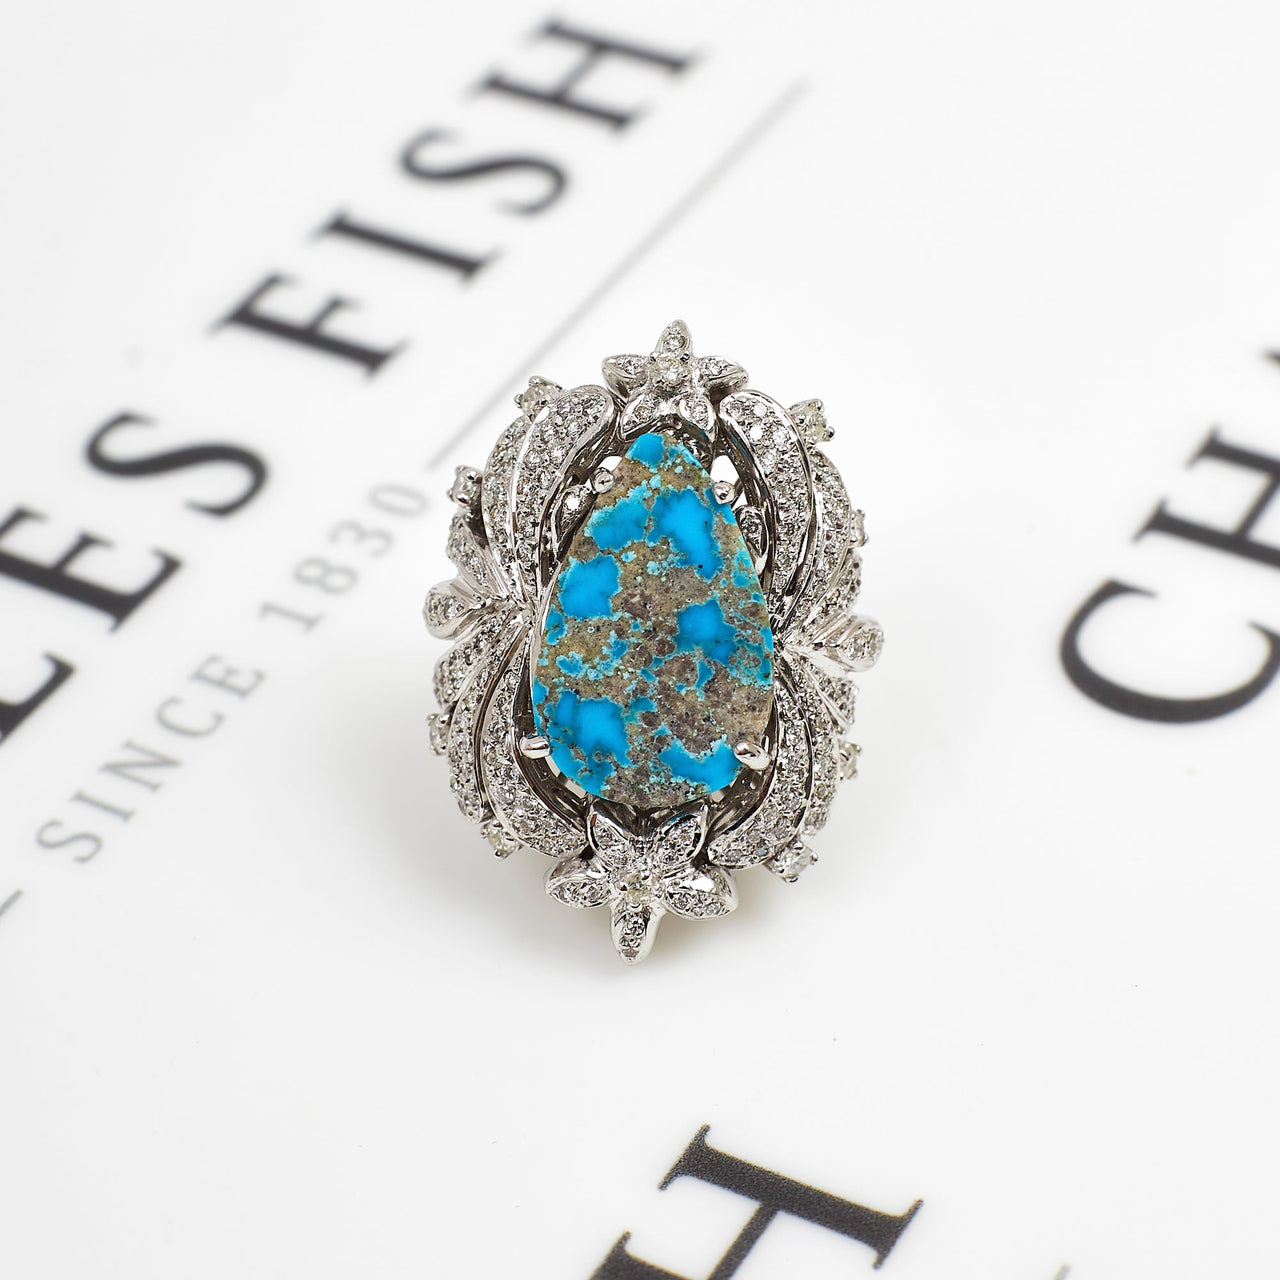 Pre-Owned White Gold Statement Turquoise & Diamond Ring